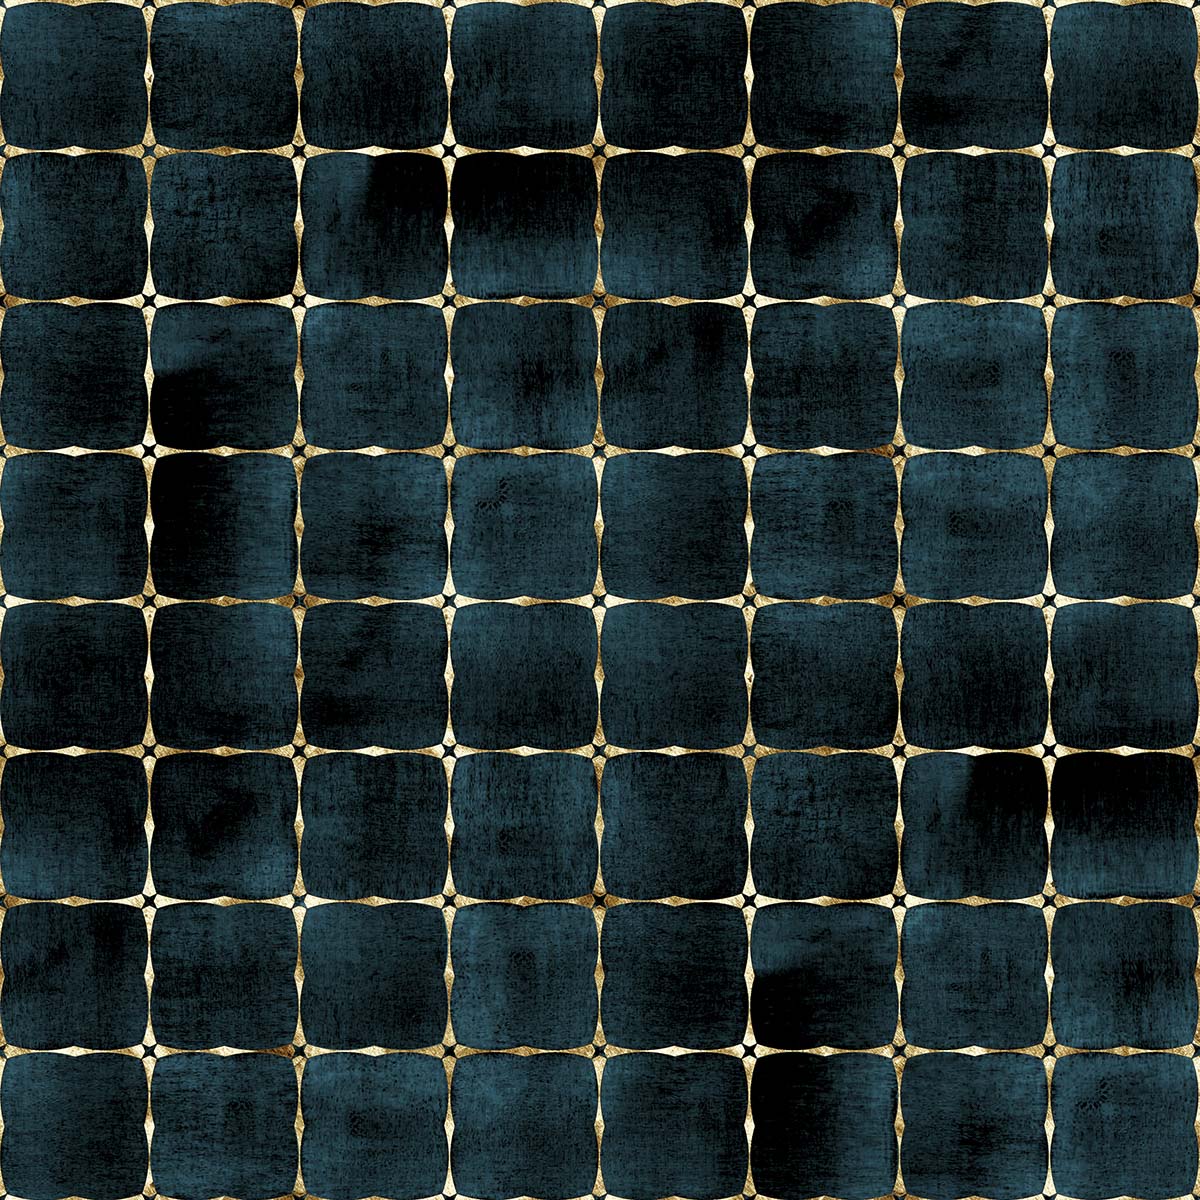 A blue and black checkered pattern